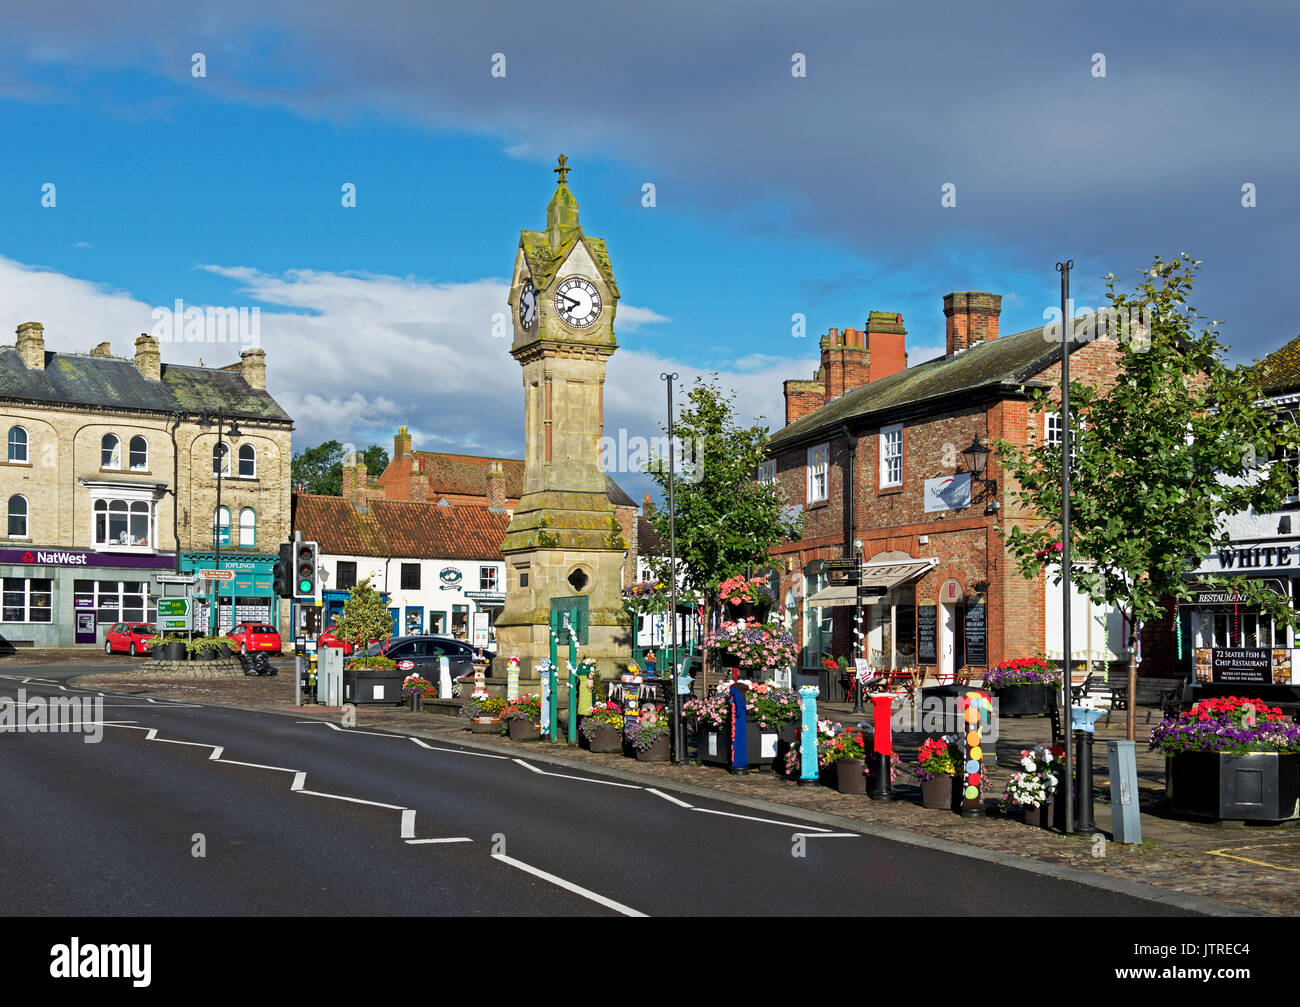 England Uk Thirsk Market Place High Resolution Stock Photography and ...